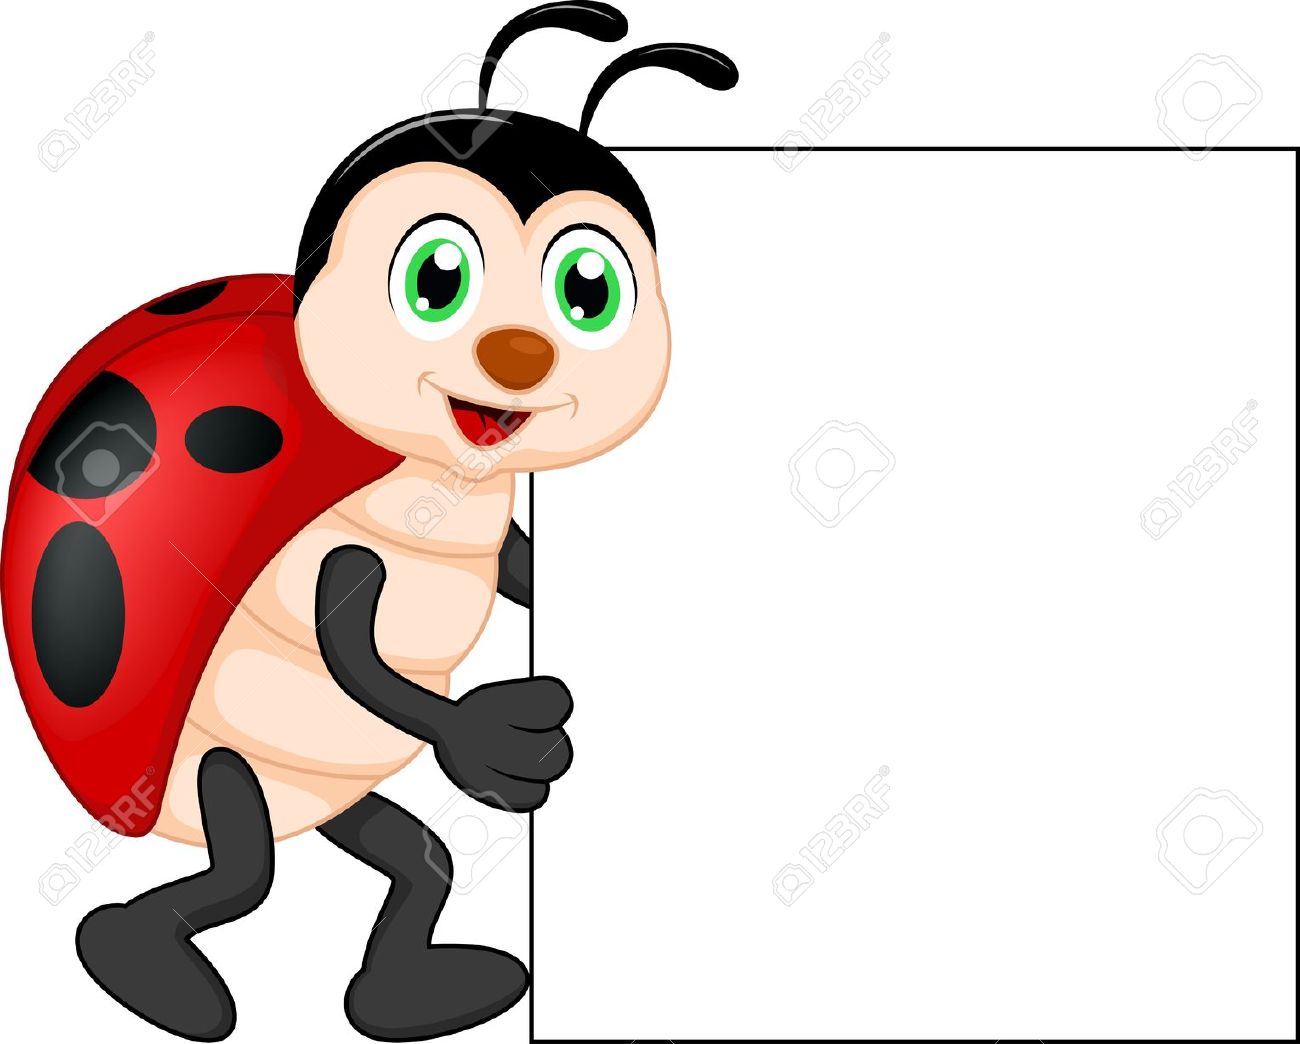 1,108 Tiny Insect Stock Vector Illustration And Royalty Free Tiny.